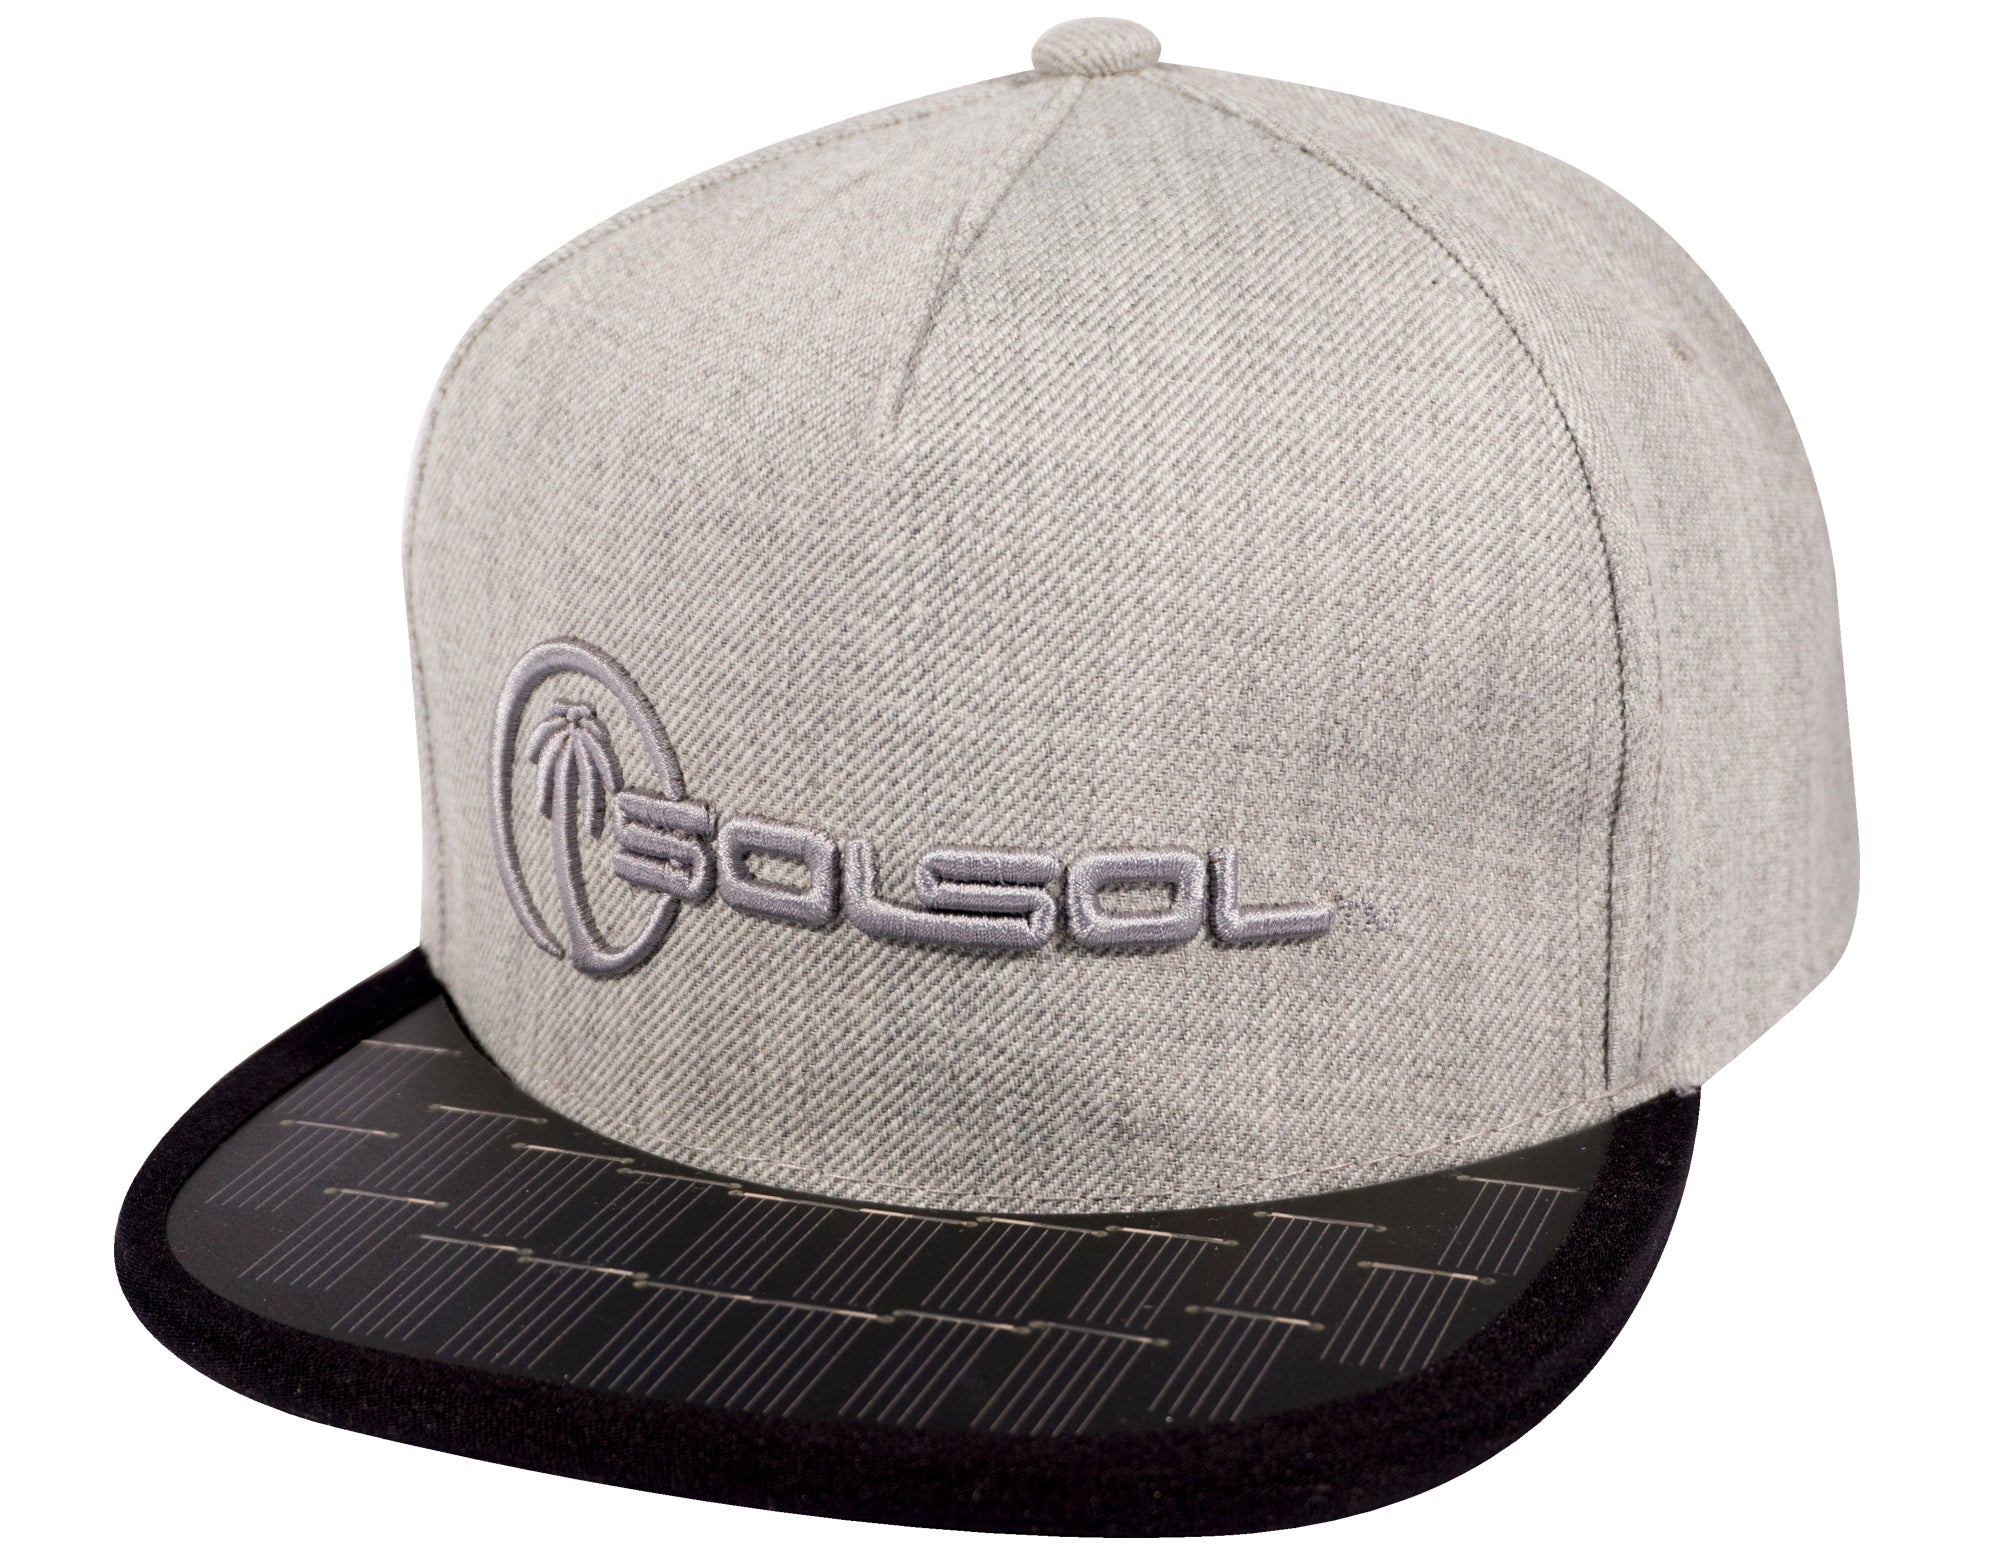 THE SOLSOL™ SNAPBACK 1.1W SOLAR CHARGER HAT